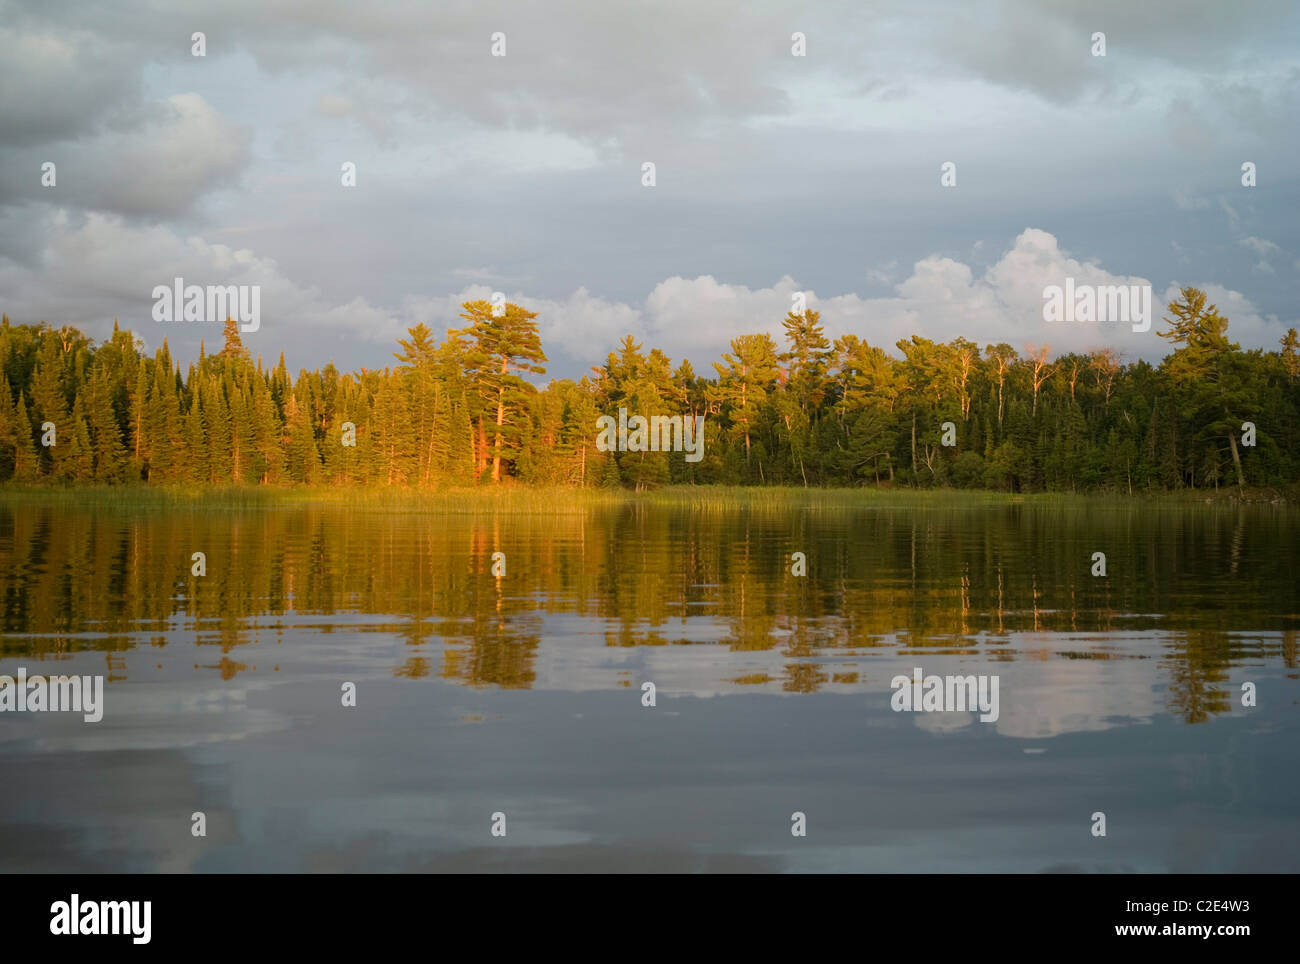 Lake Of The Woods, Ontario, Canada; View Of Forest Across A Lake Stock Photo